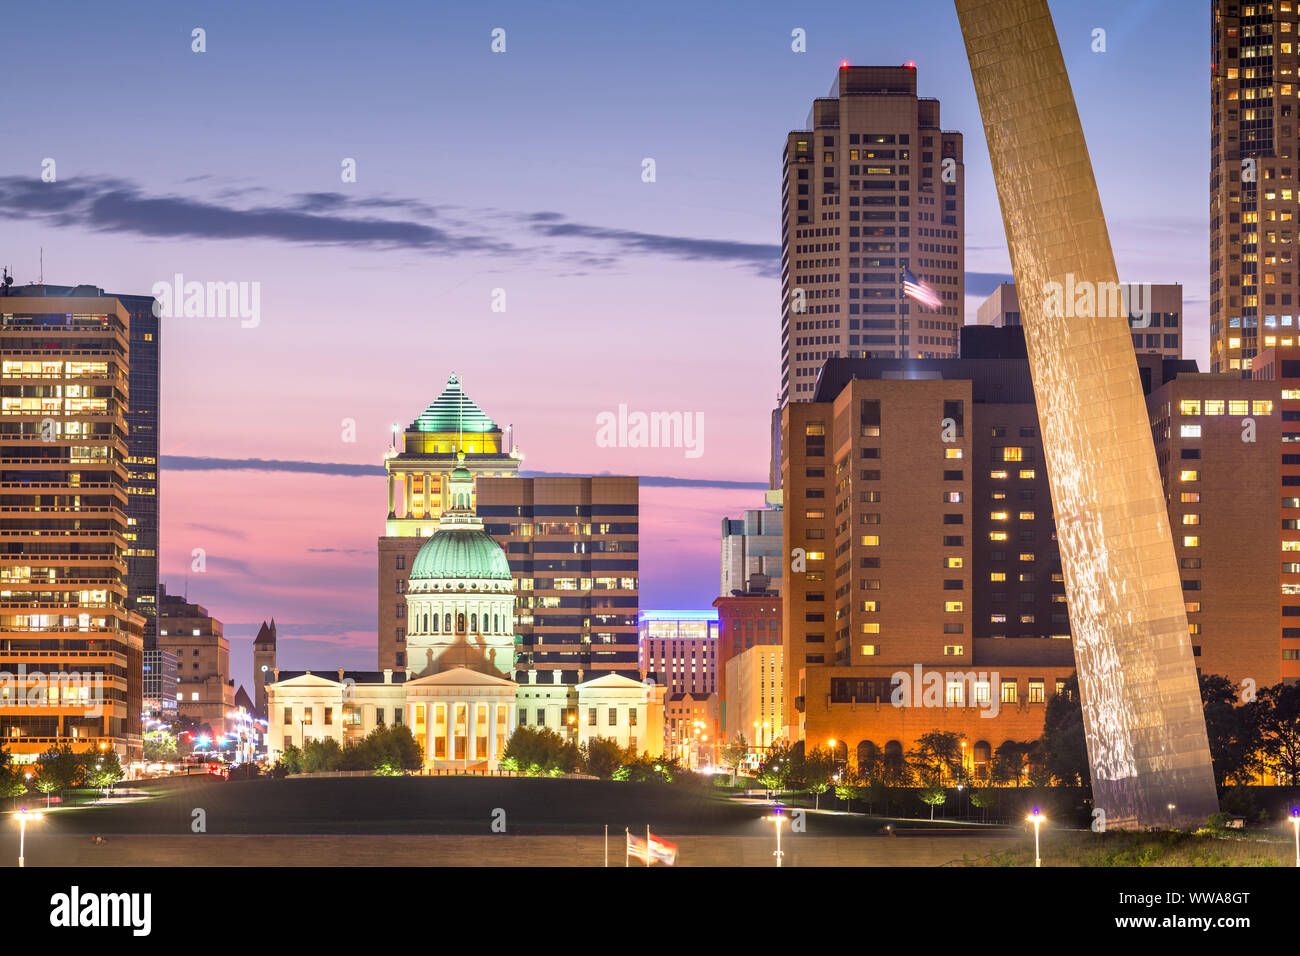 St. Louis, Missouri, USA downtown cityscape with the old courthouse at dusk. Stock Photo